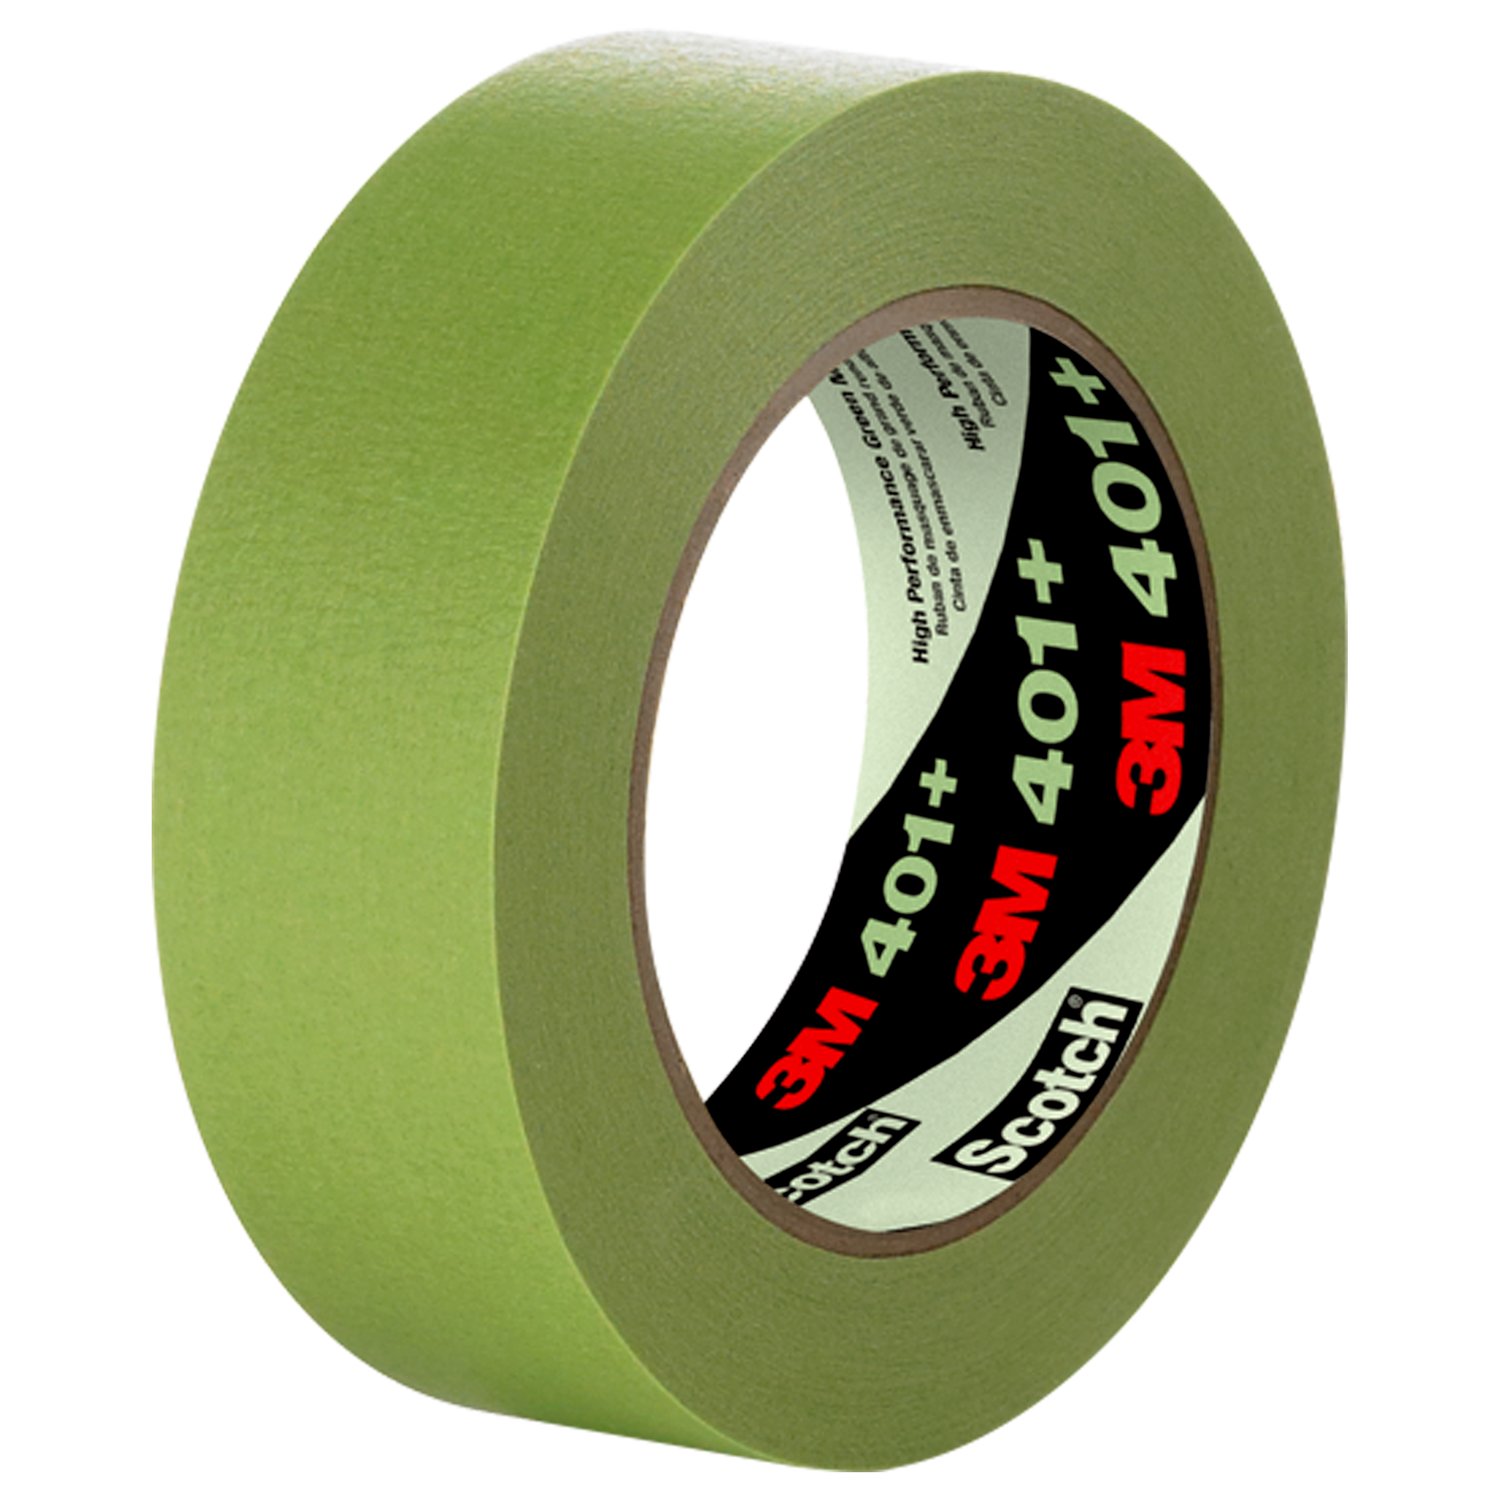 Sure-max Premium Carton Packing Tape 1.8 Mil 330 Feet (110 Yards) - Clear -  1 Case (36 Rolls Total) : Target